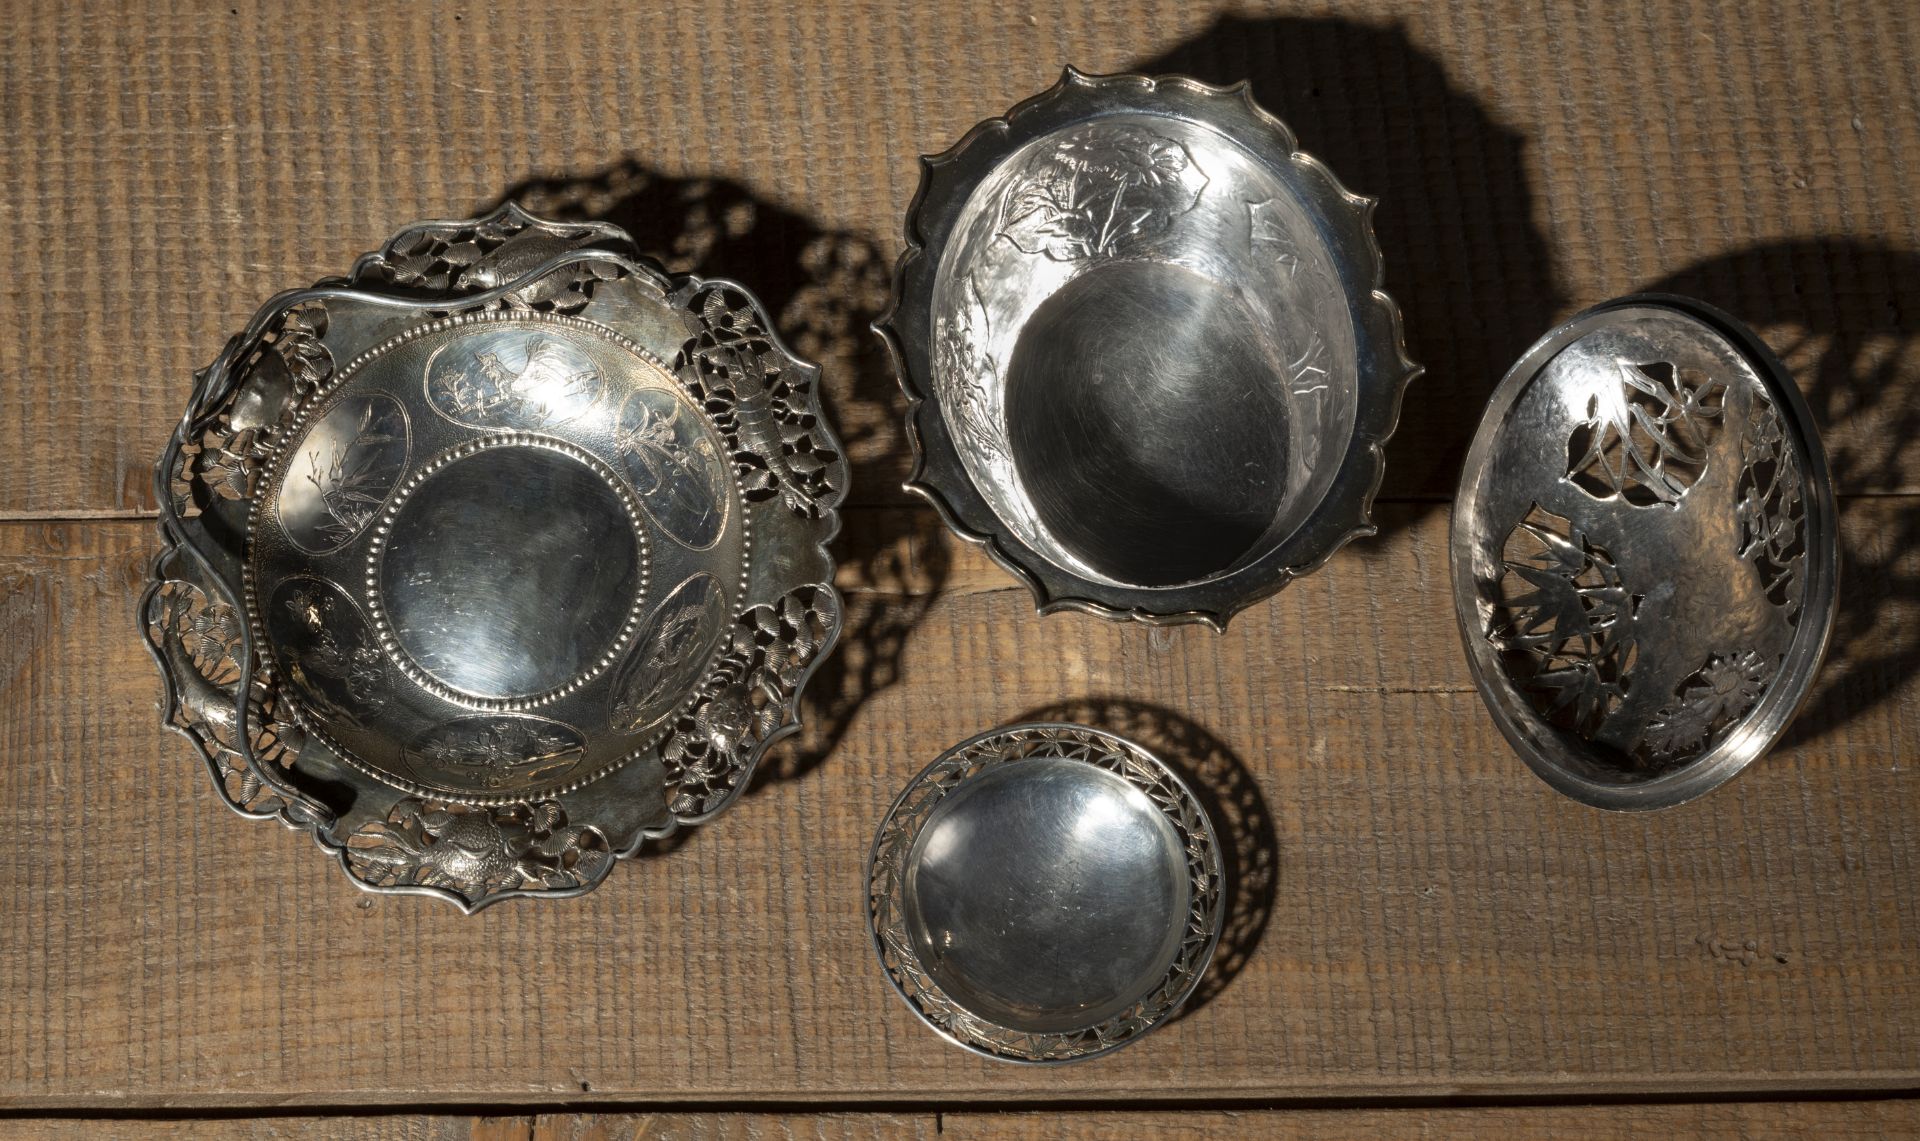 A SILVER COVERED BOWL, A BOWL WITH HANDLE AND A SMALL BOWL WITH FLORAL DECORATION, PARTLY IN OPENWO - Image 3 of 4